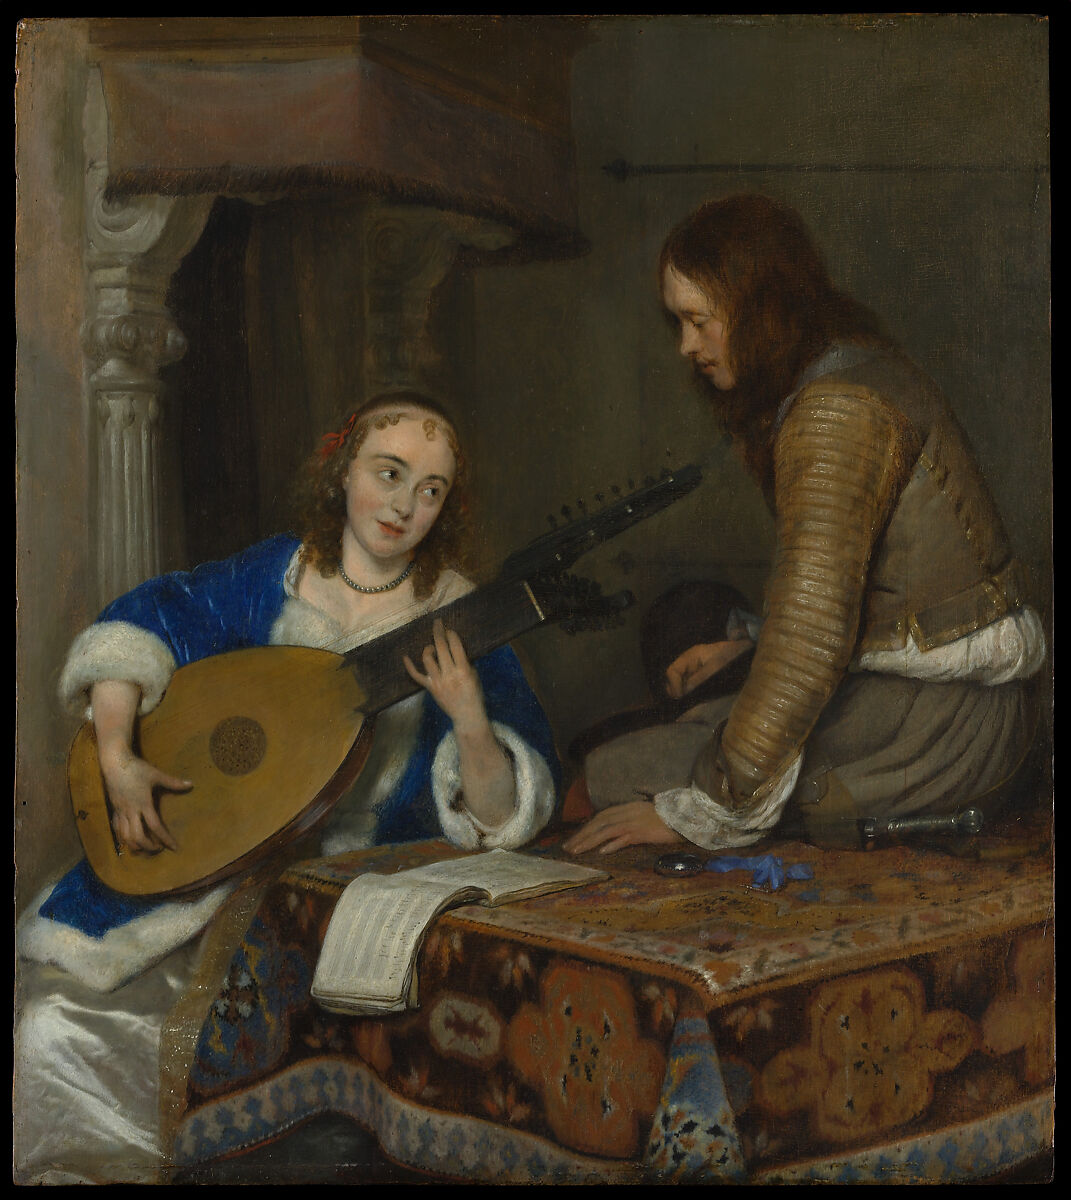 A Woman Playing the Theorbo-Lute and a Cavalier, Gerard ter Borch the Younger, Oil on wood